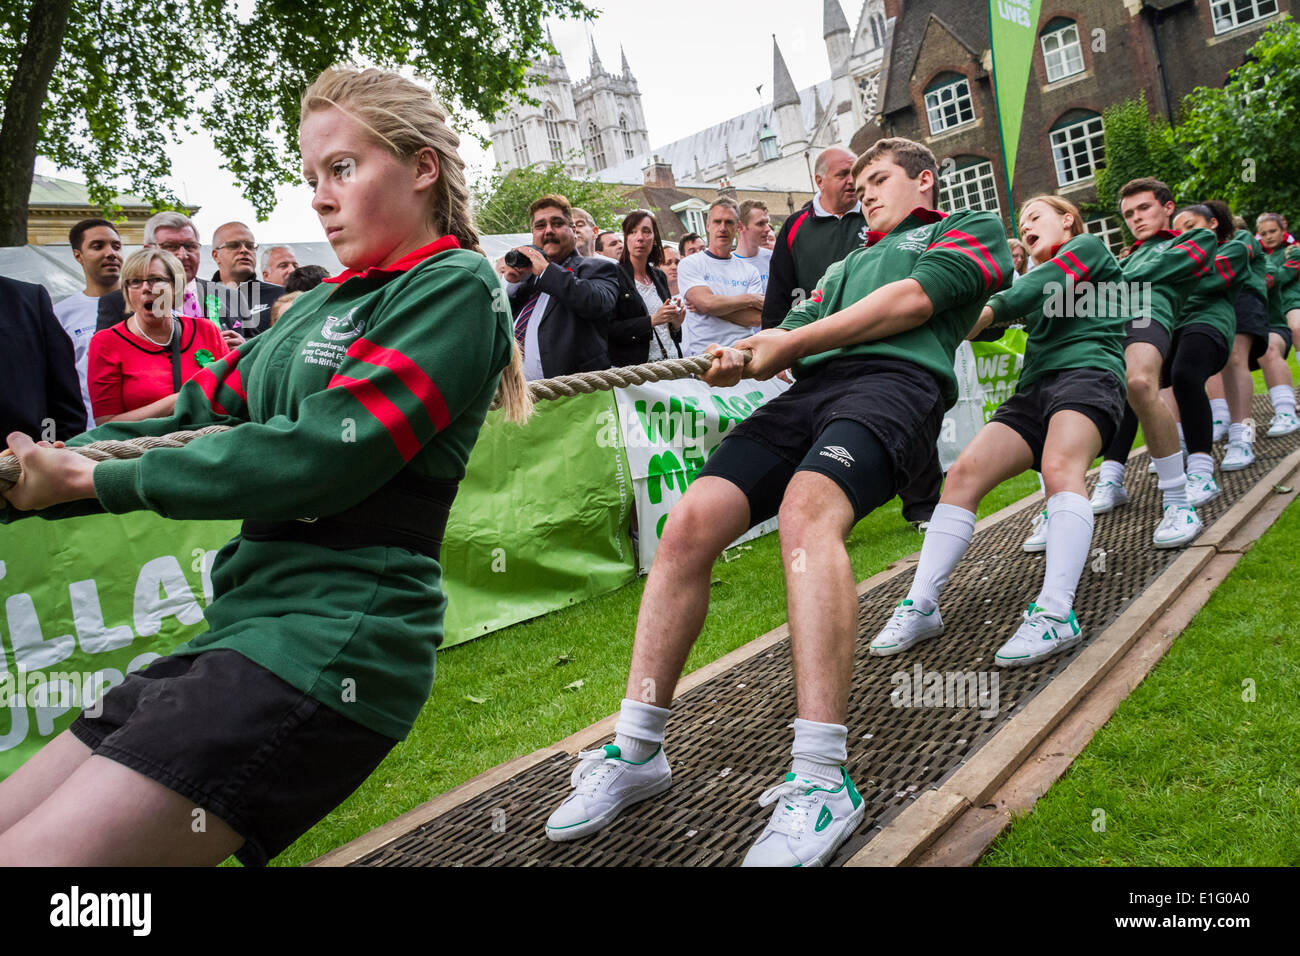 Westminster, London, UK. 03rd June, 2014. Tug of war between MPs and Lords in annual charity match in Westminster, London Credit:  Guy Corbishley/Alamy Live News Stock Photo